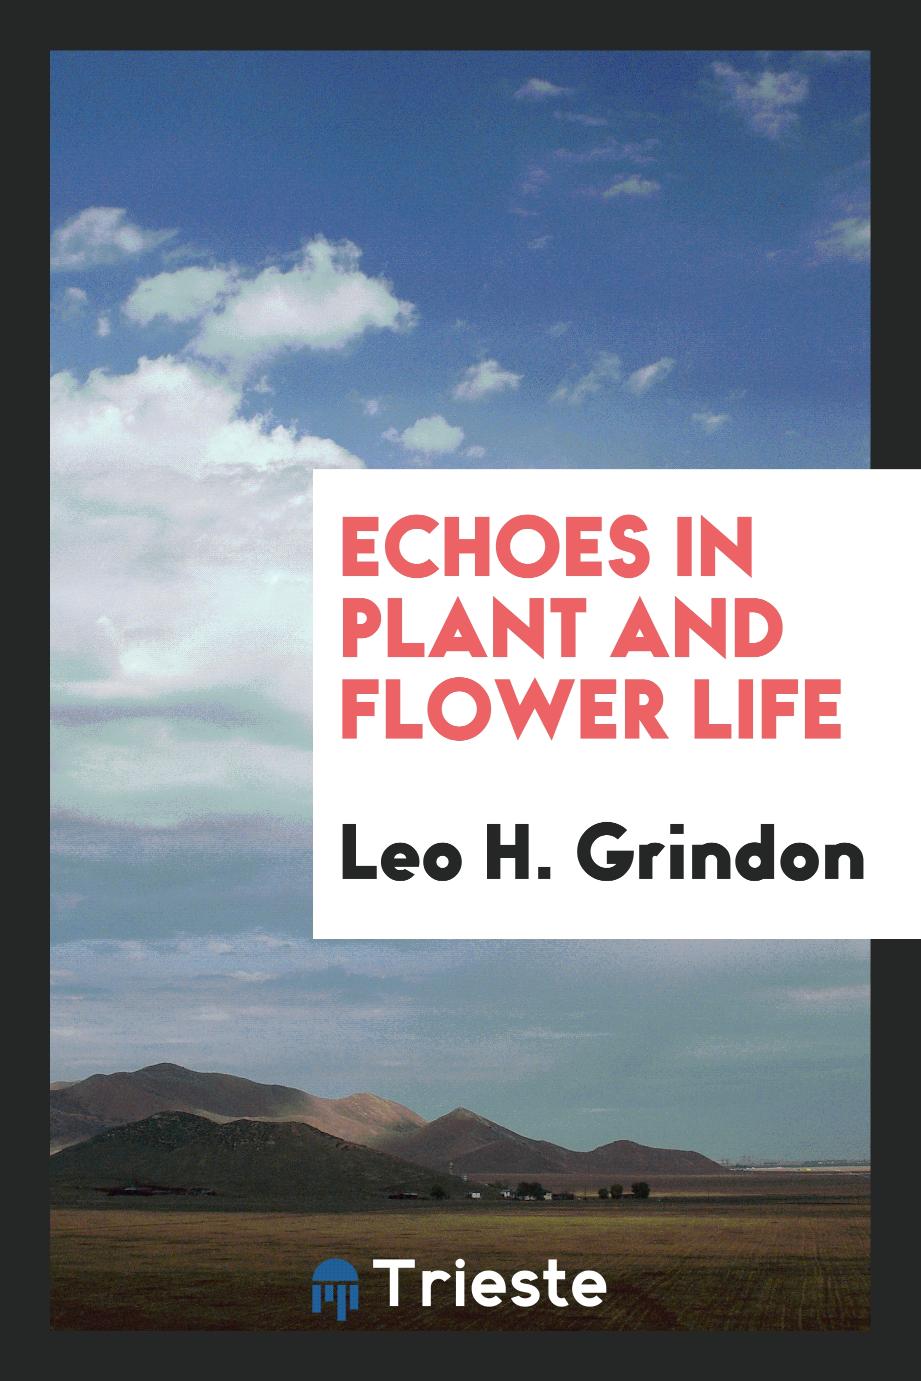 Leo H. Grindon - Echoes in Plant and Flower Life